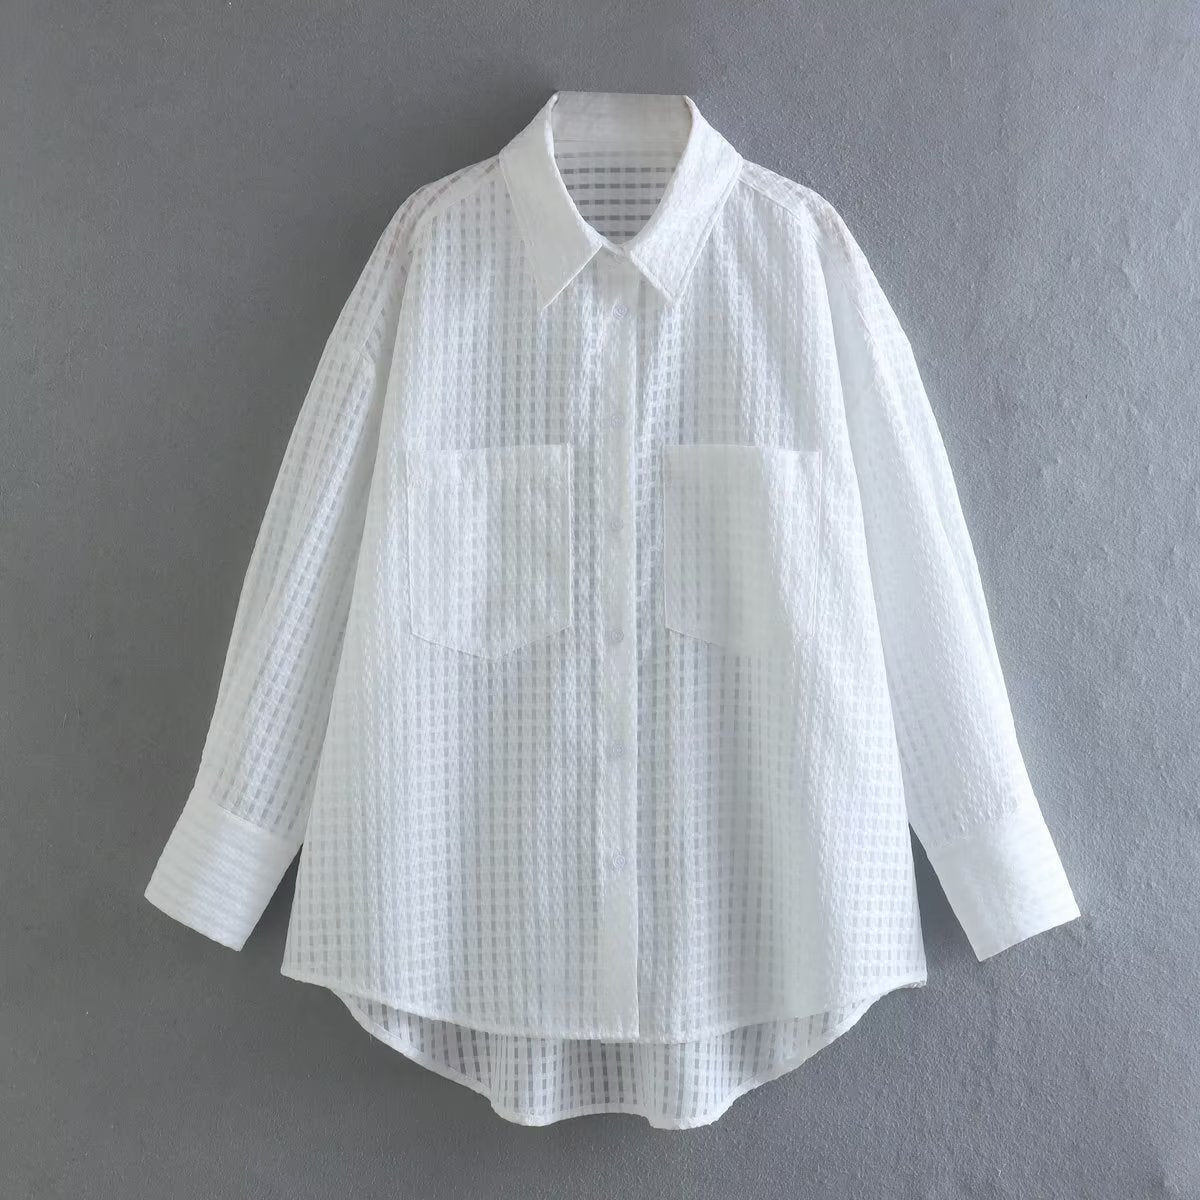 Women's Casual white shirt for work